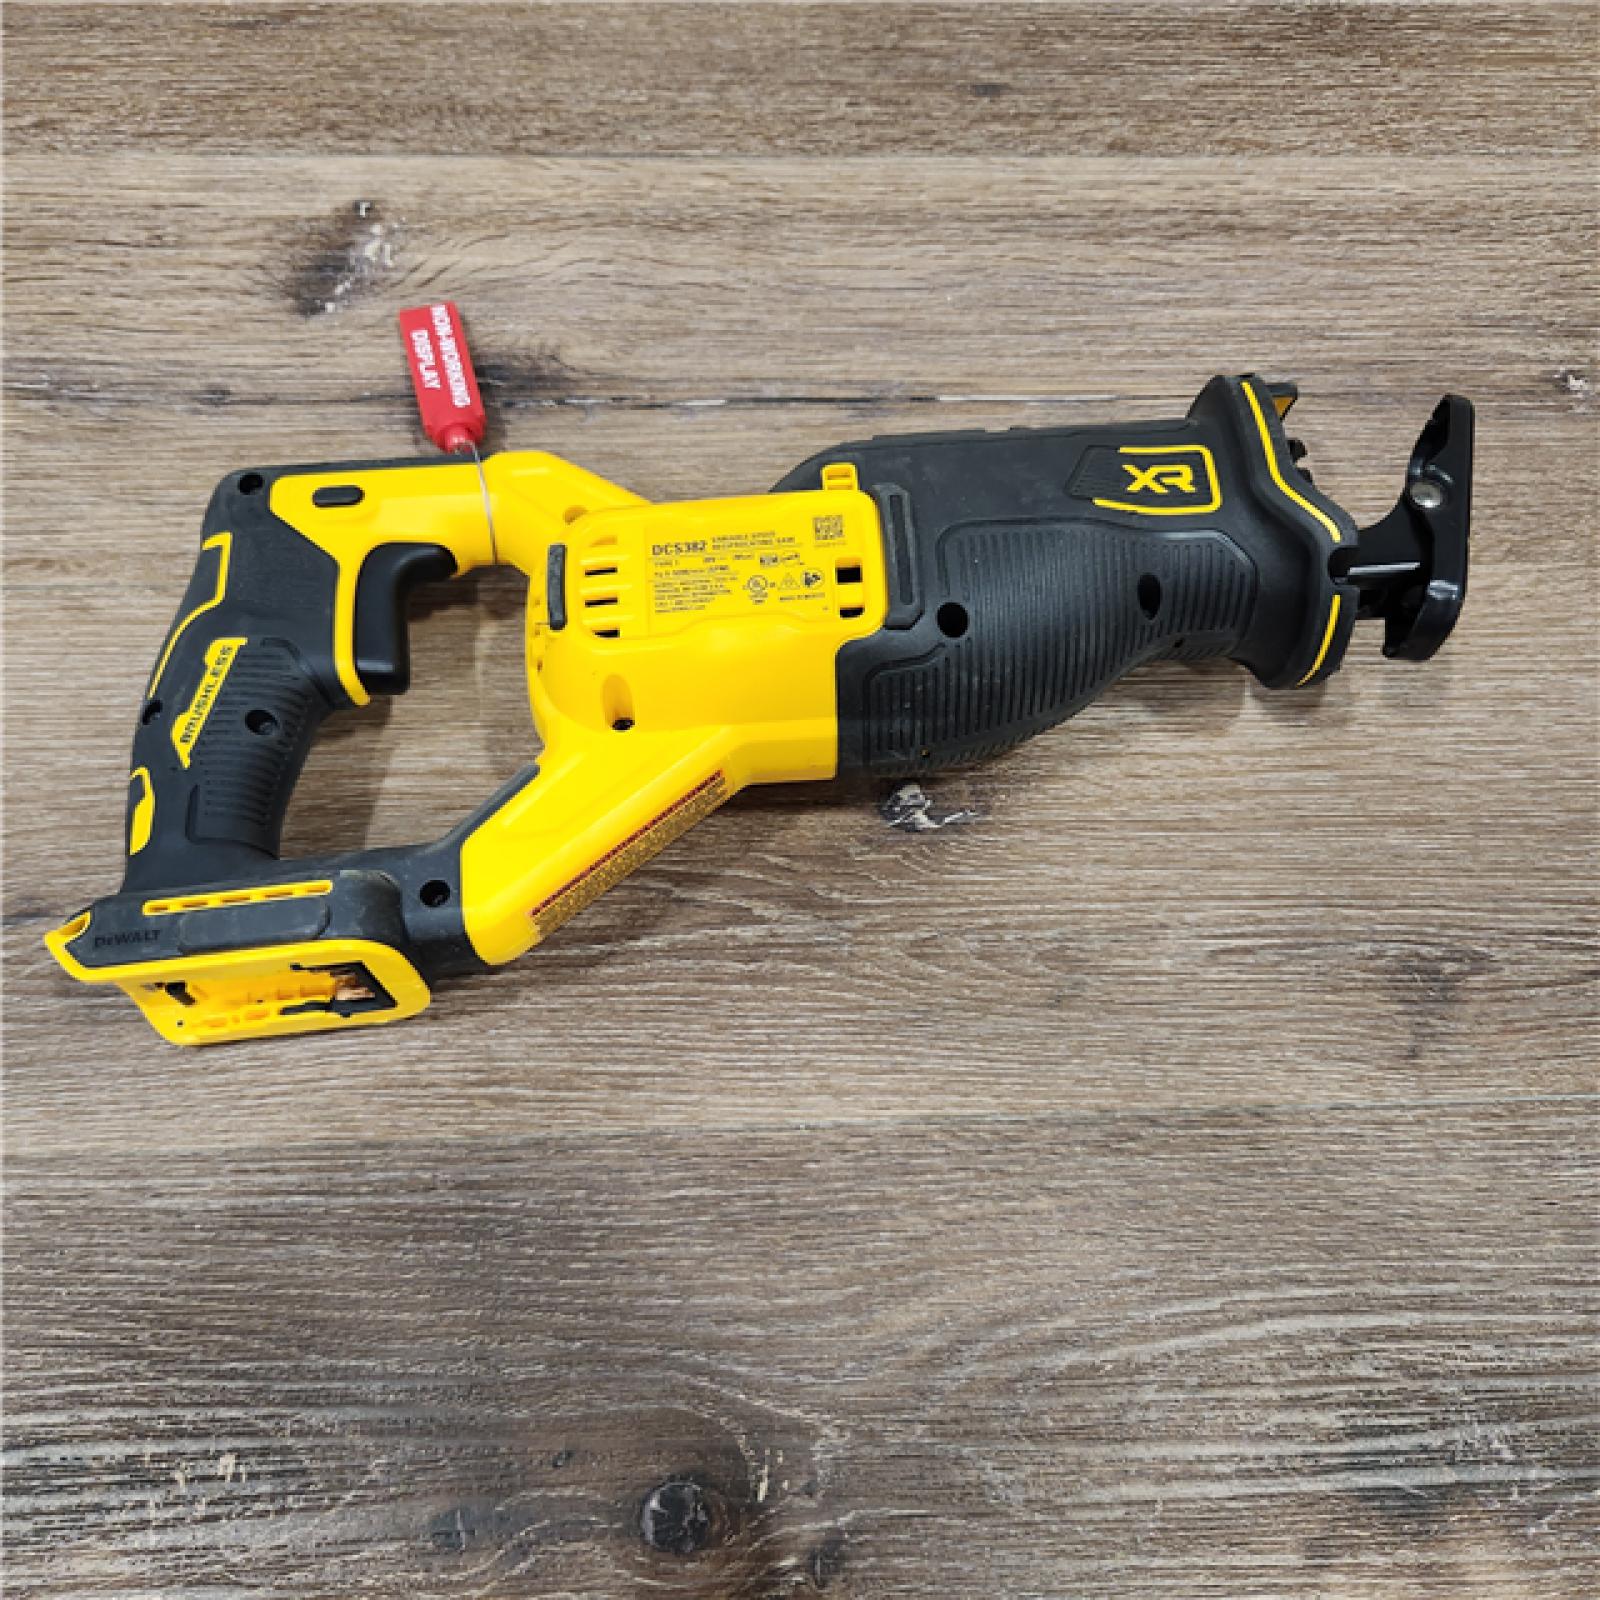 AS-IS DEWALT 20V MAX Lithium-Ion Cordless Brushless Reciprocating Saw Kit with 5.0Ah POWERSTACK Battery and Charger